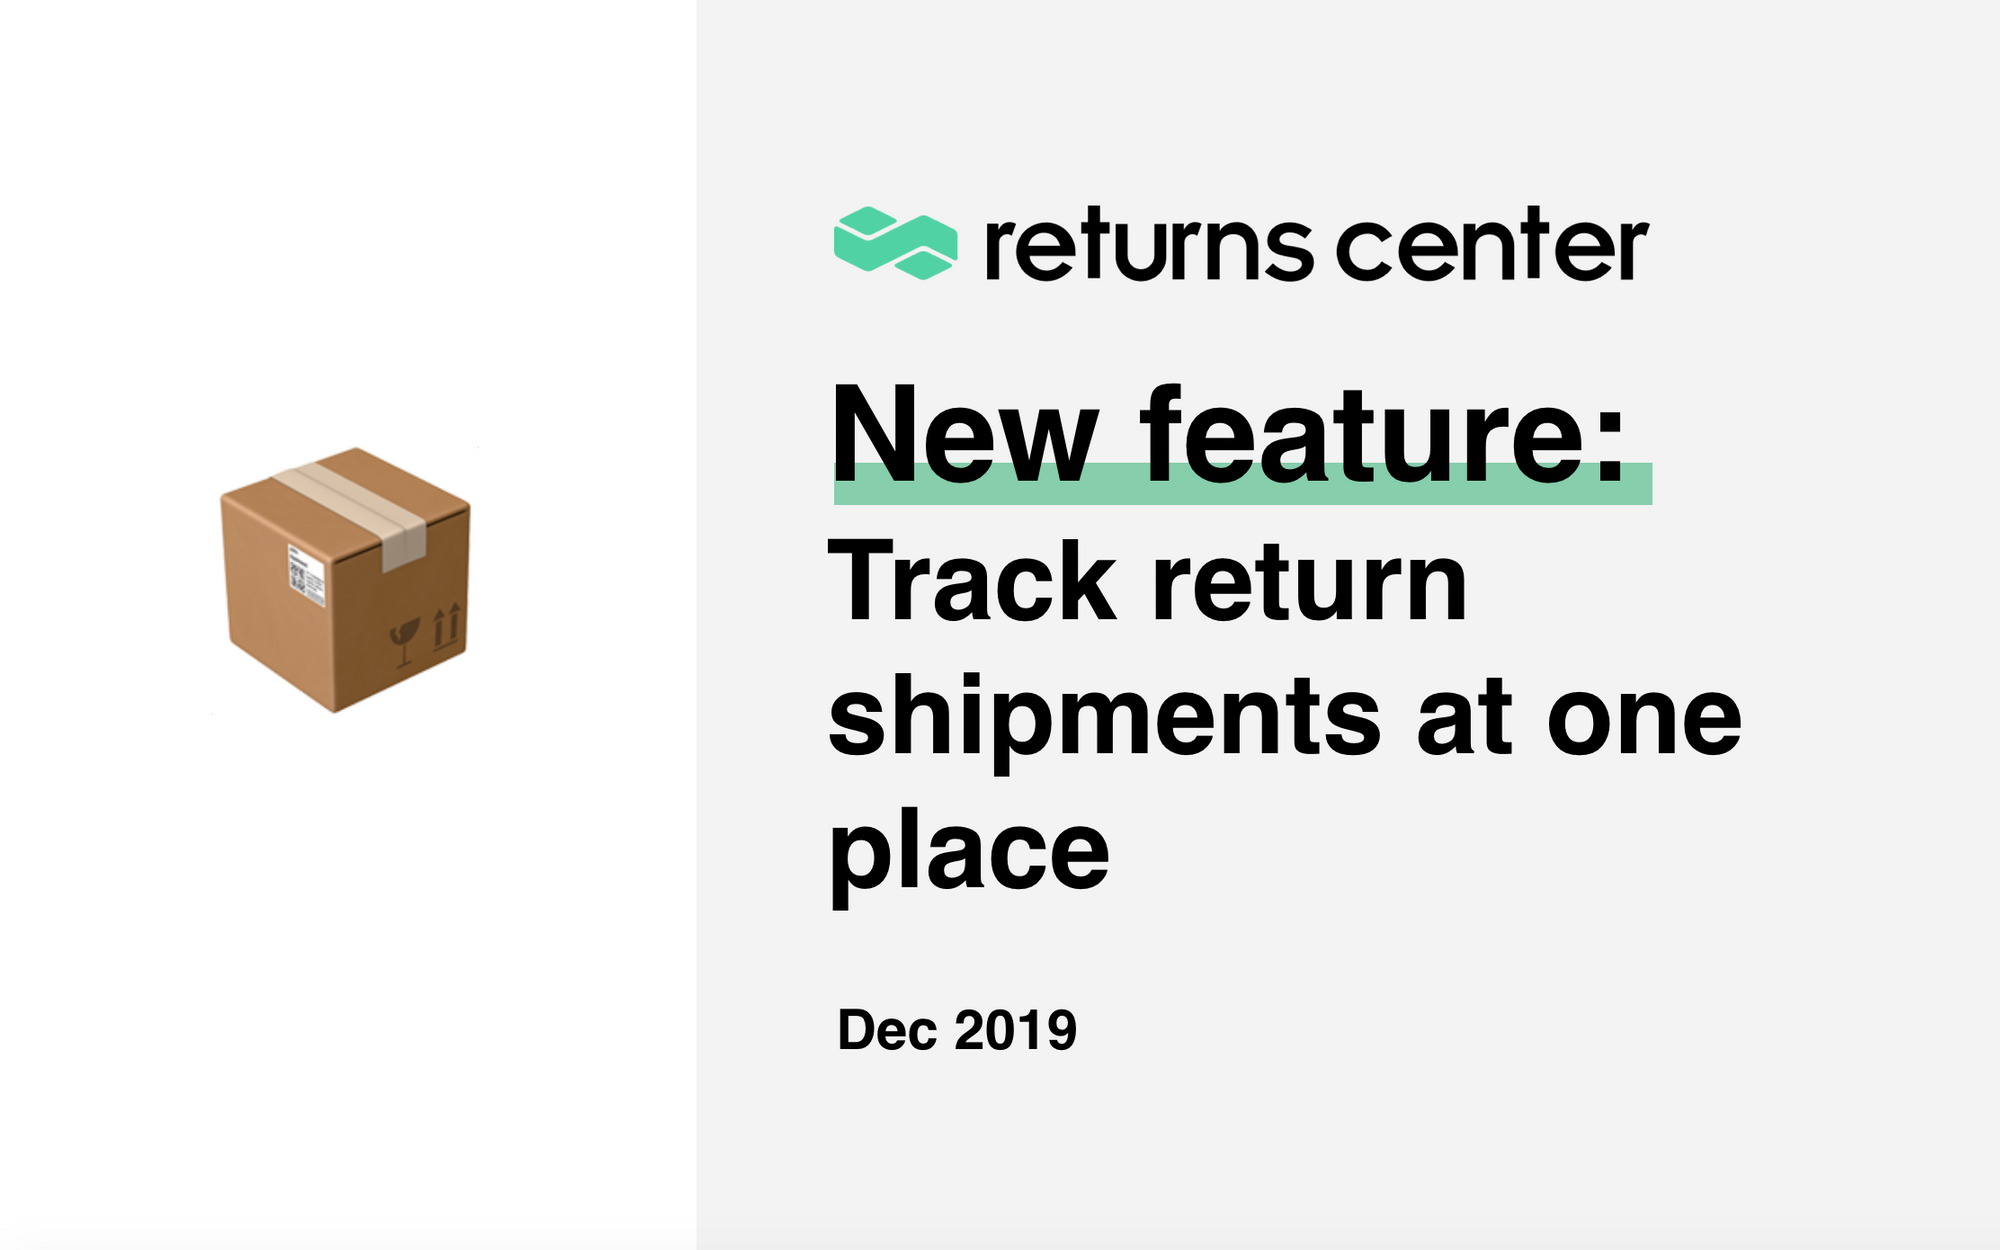 New feature: Track return shipments at one place